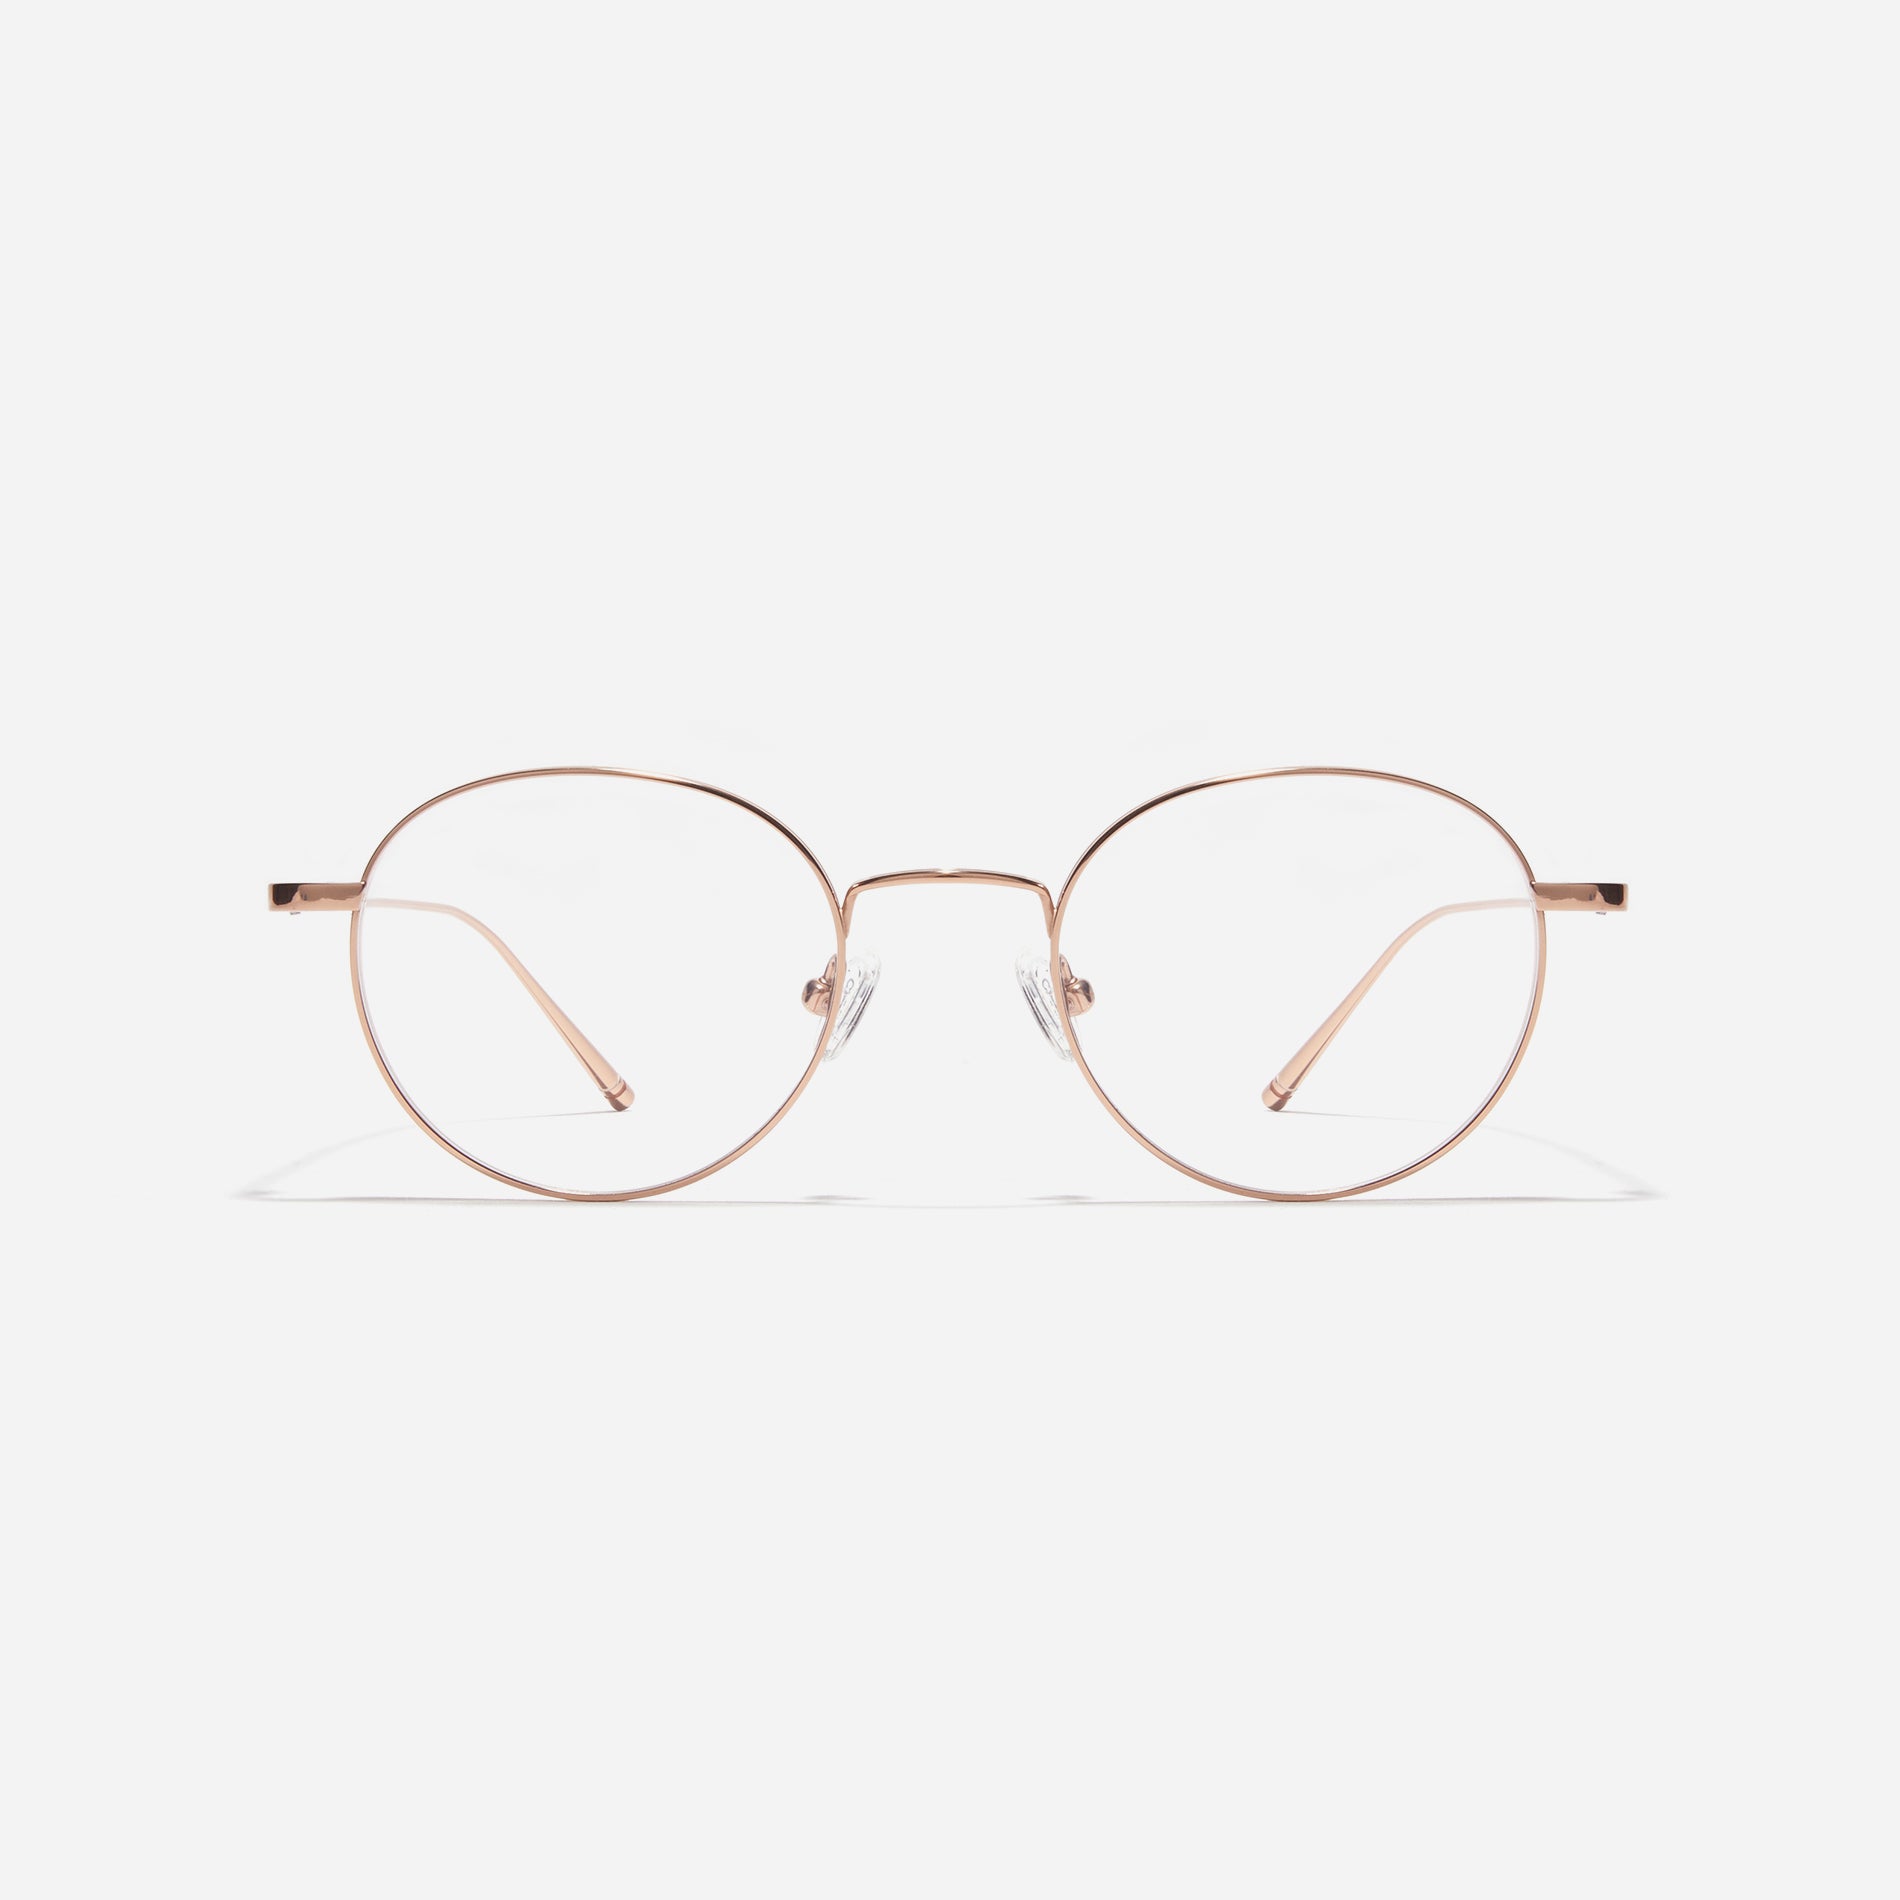 Round-shaped titanium eyeglasses inspired by the aesthetics of platform shoes. Their dual-rim structure effortlessly accommodates the use of thick lenses for higher prescriptions, while retro vibes shine through side color accents applied using epoxy techniques. 